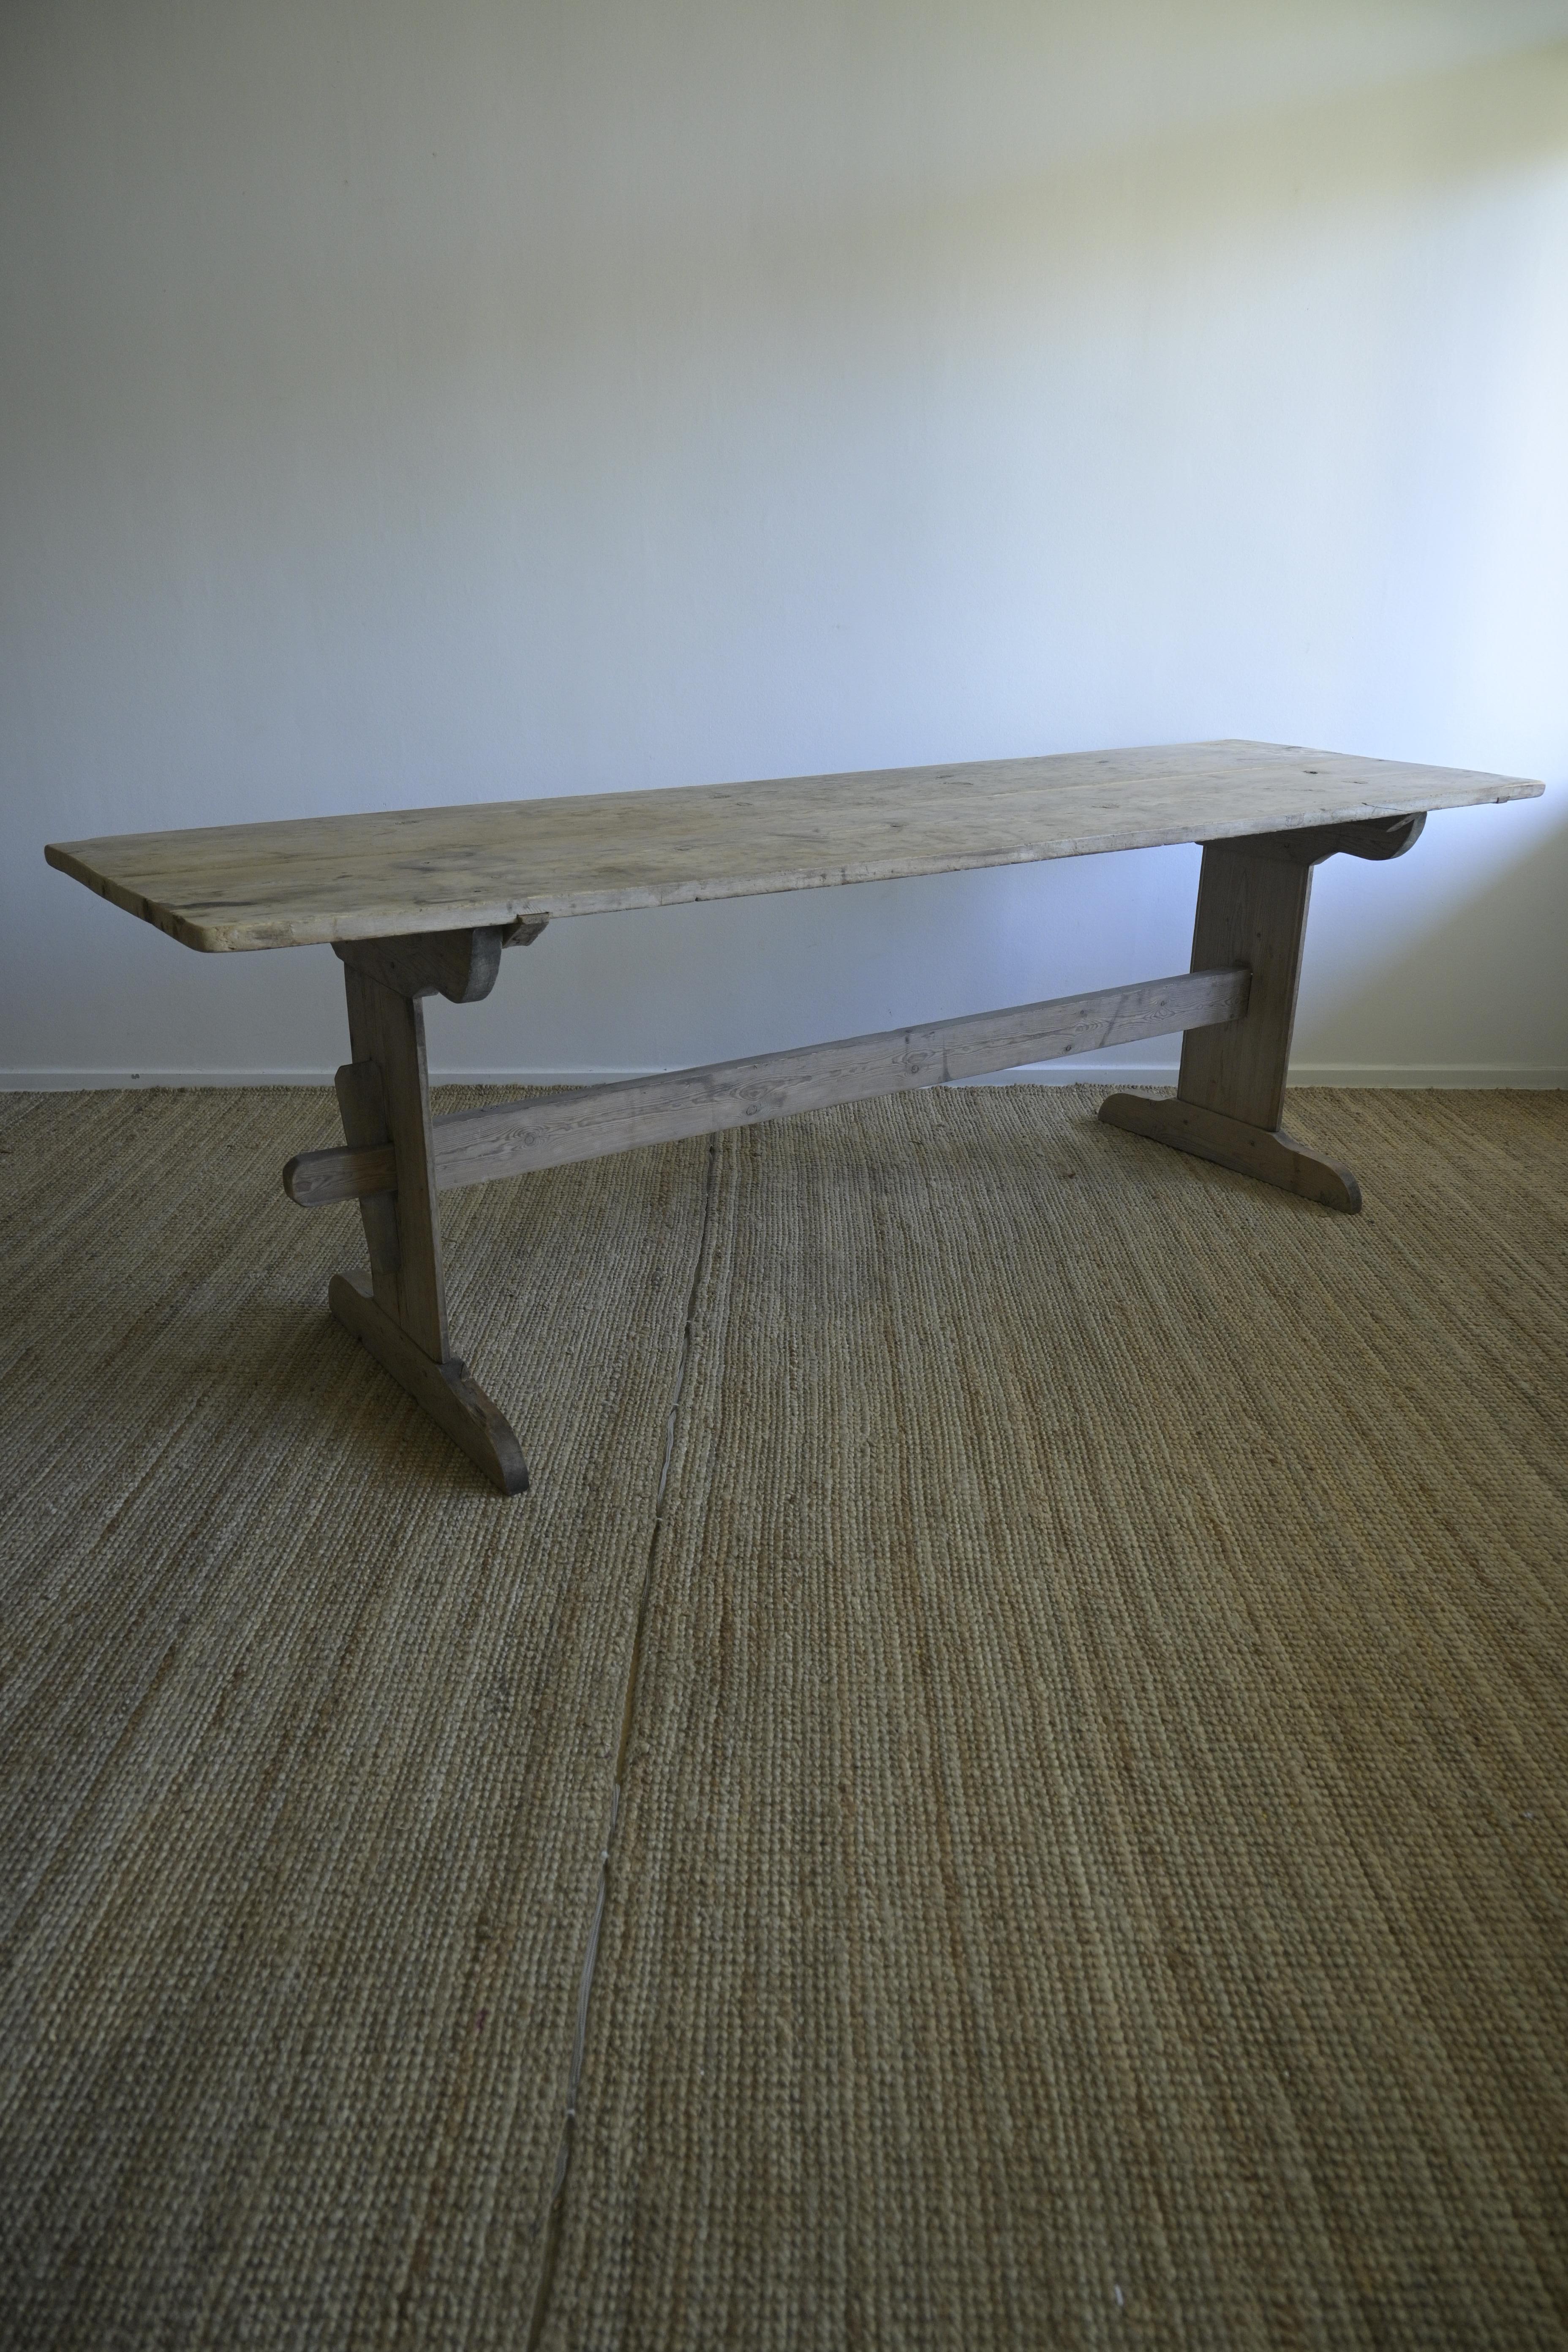 Long Swedish Trestle Table ca 1780

This table comes from Alfta in Hälsingland, Sweden, and has a great length with a beautifull smooth, heavy patina.
The colors range from gray, brown to black, with nicks, scuffs, and a depth from constant wear